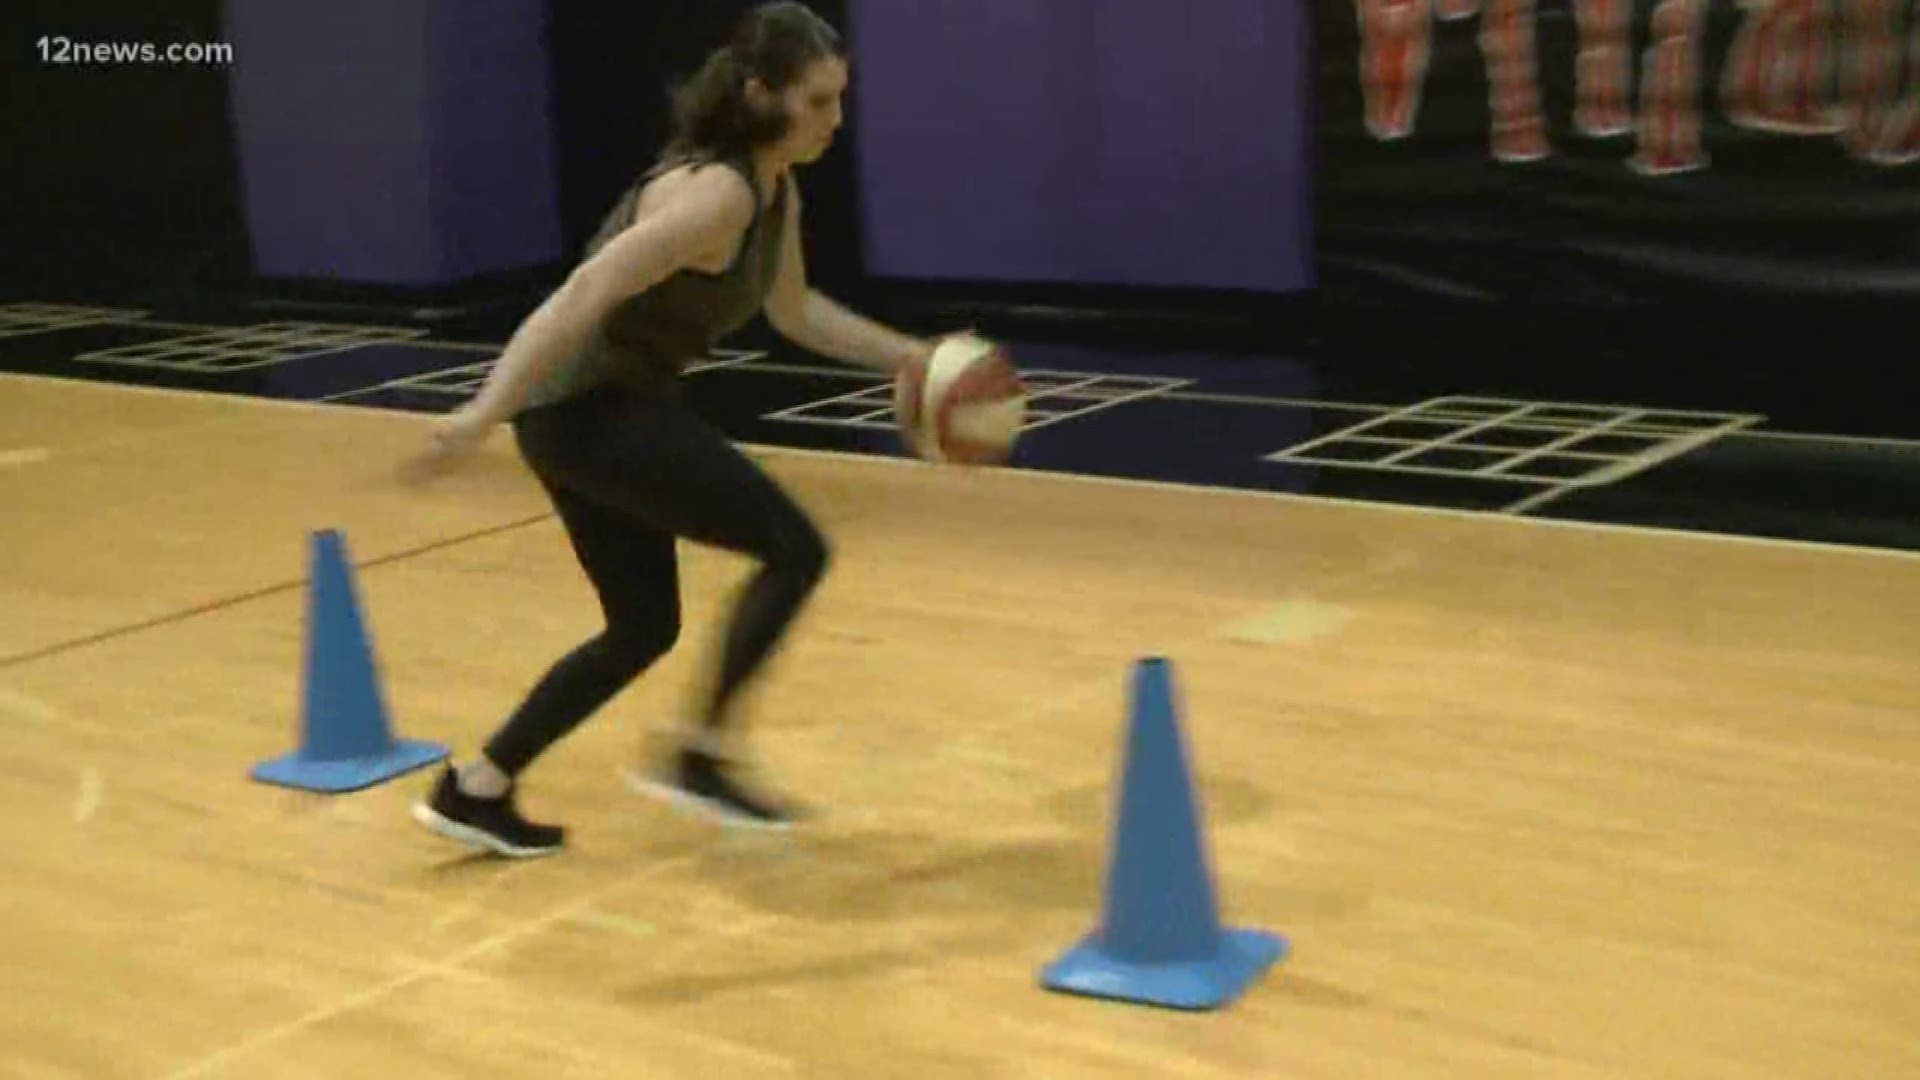 The 12 News sports team took part in the Phoenix Mercury's media skills challenge Wednesday, and let's just say they should probably stick to reporting rather than playing sports. Check out where they finished over all!